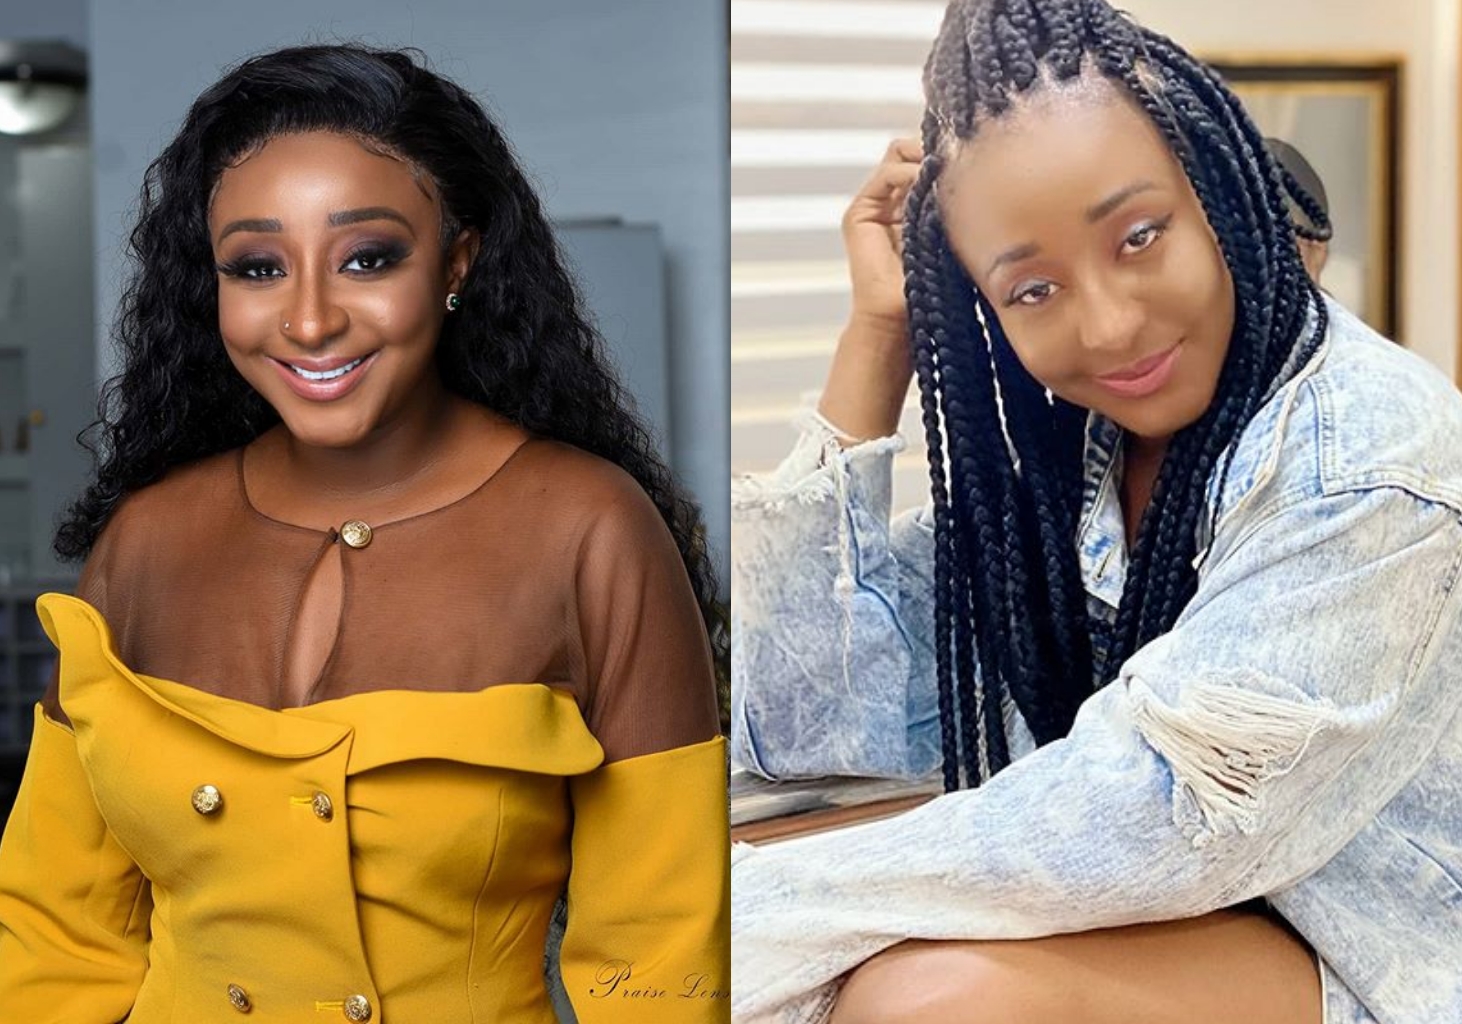 Ini Edo celebrates 38th Birthday with fans in cash giveaways worth Millions (Photos)